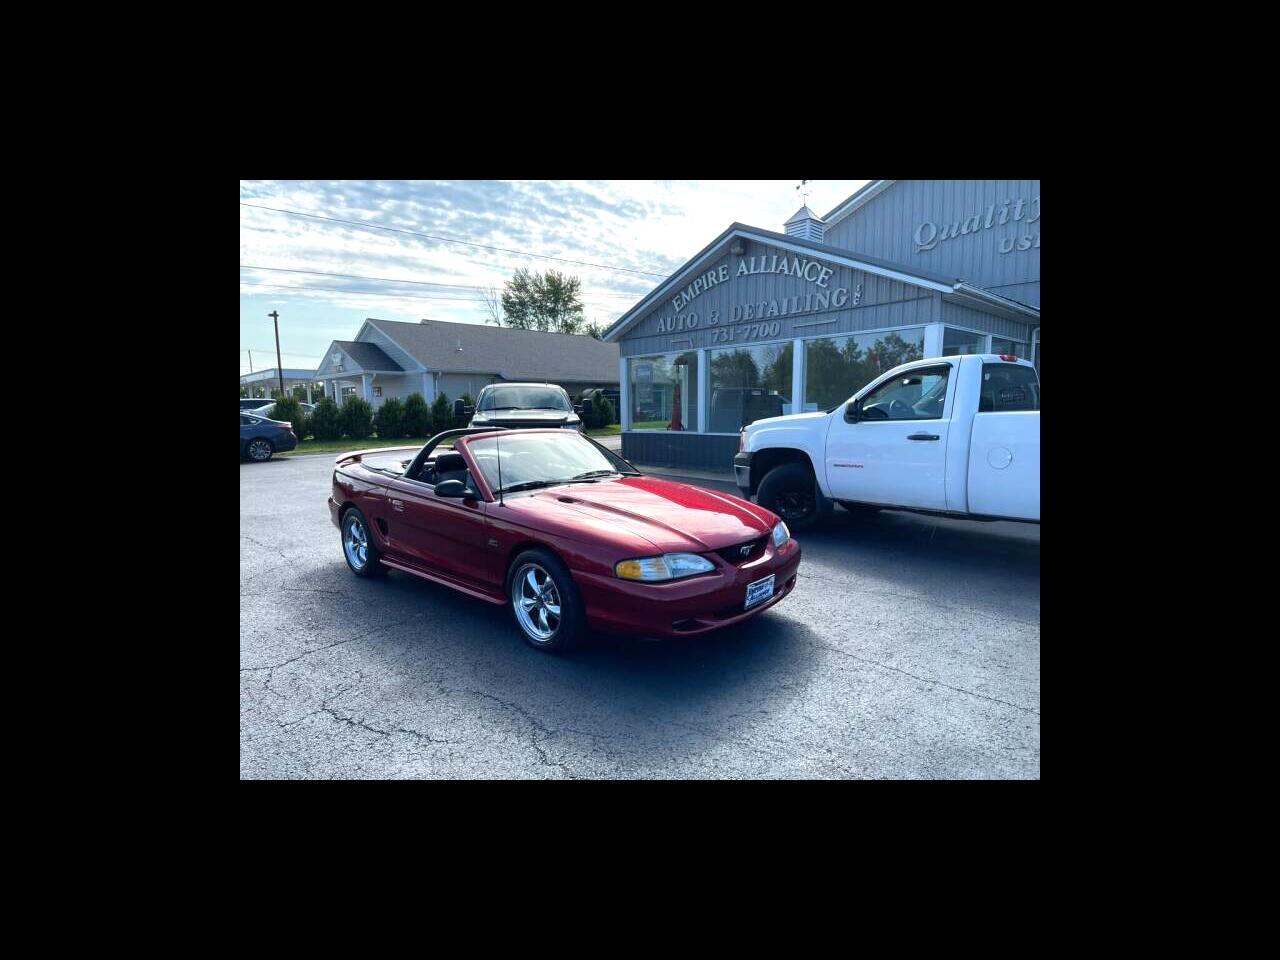 Ford Mustang GT convertible 1994